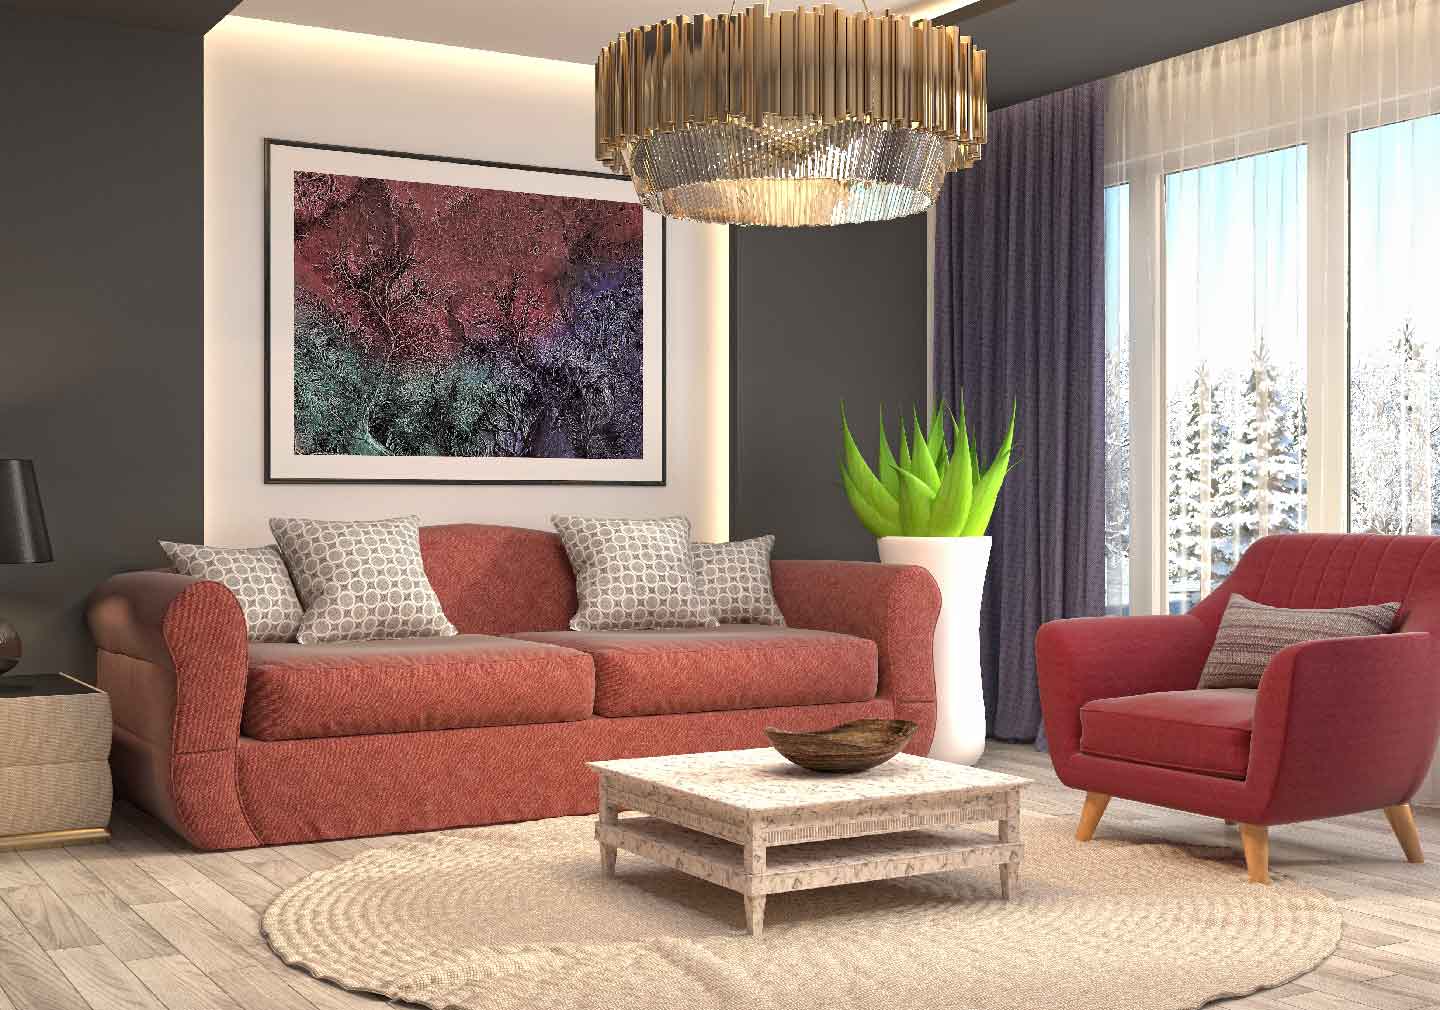 red sofa with painting behind along with coffee table - living room interior designs